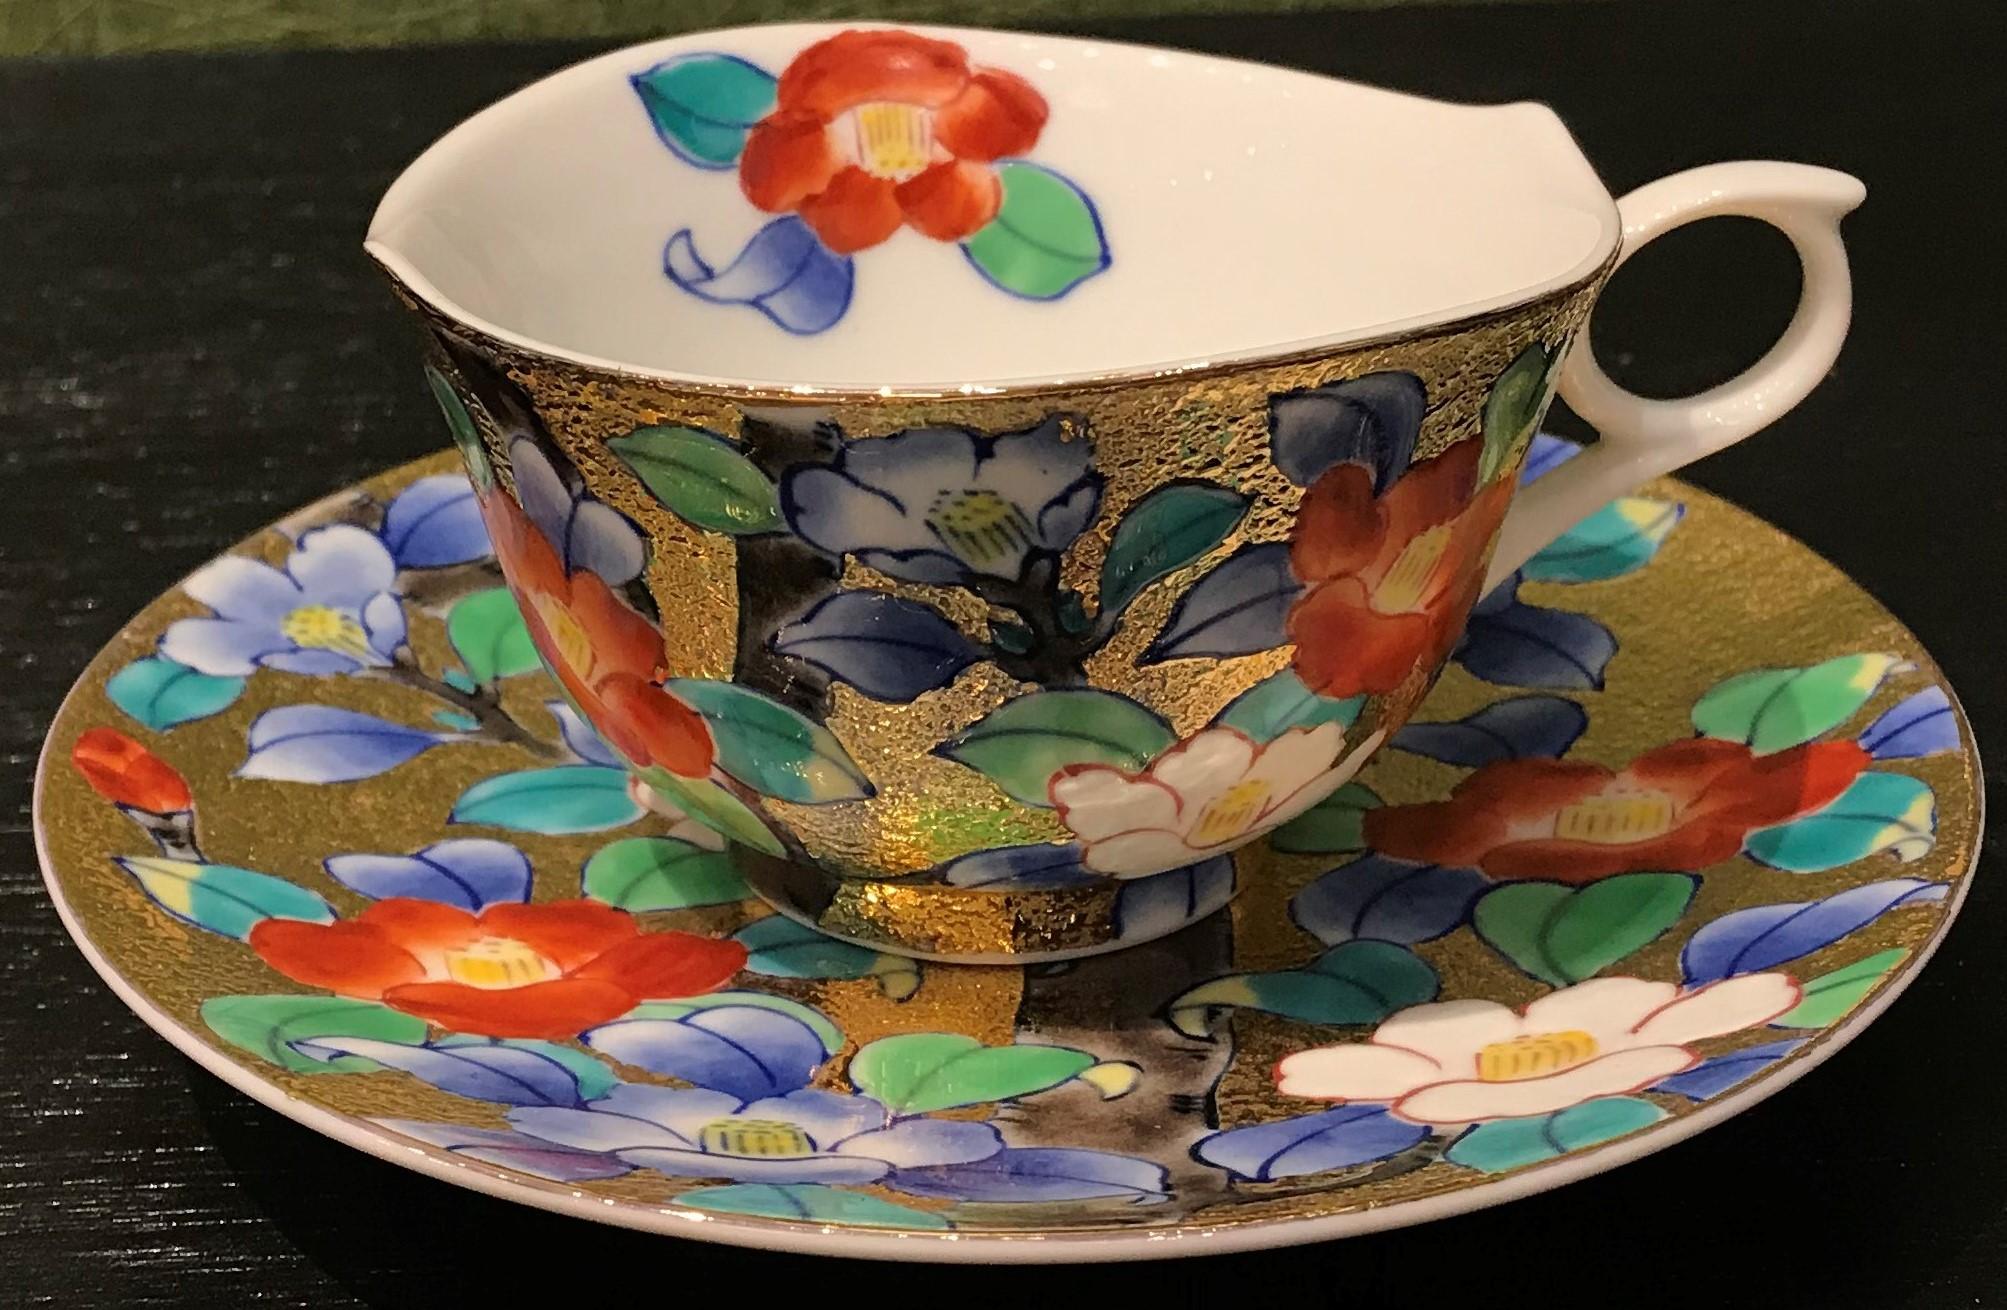 Extraordinary contemporary gilded fine porcelain cup and saucer, intricately hand painted in vivid red, white, blue and green on an attractive gilded body, featuring stunning camellias in full bloom.
This cup and saucer is from a signature series by